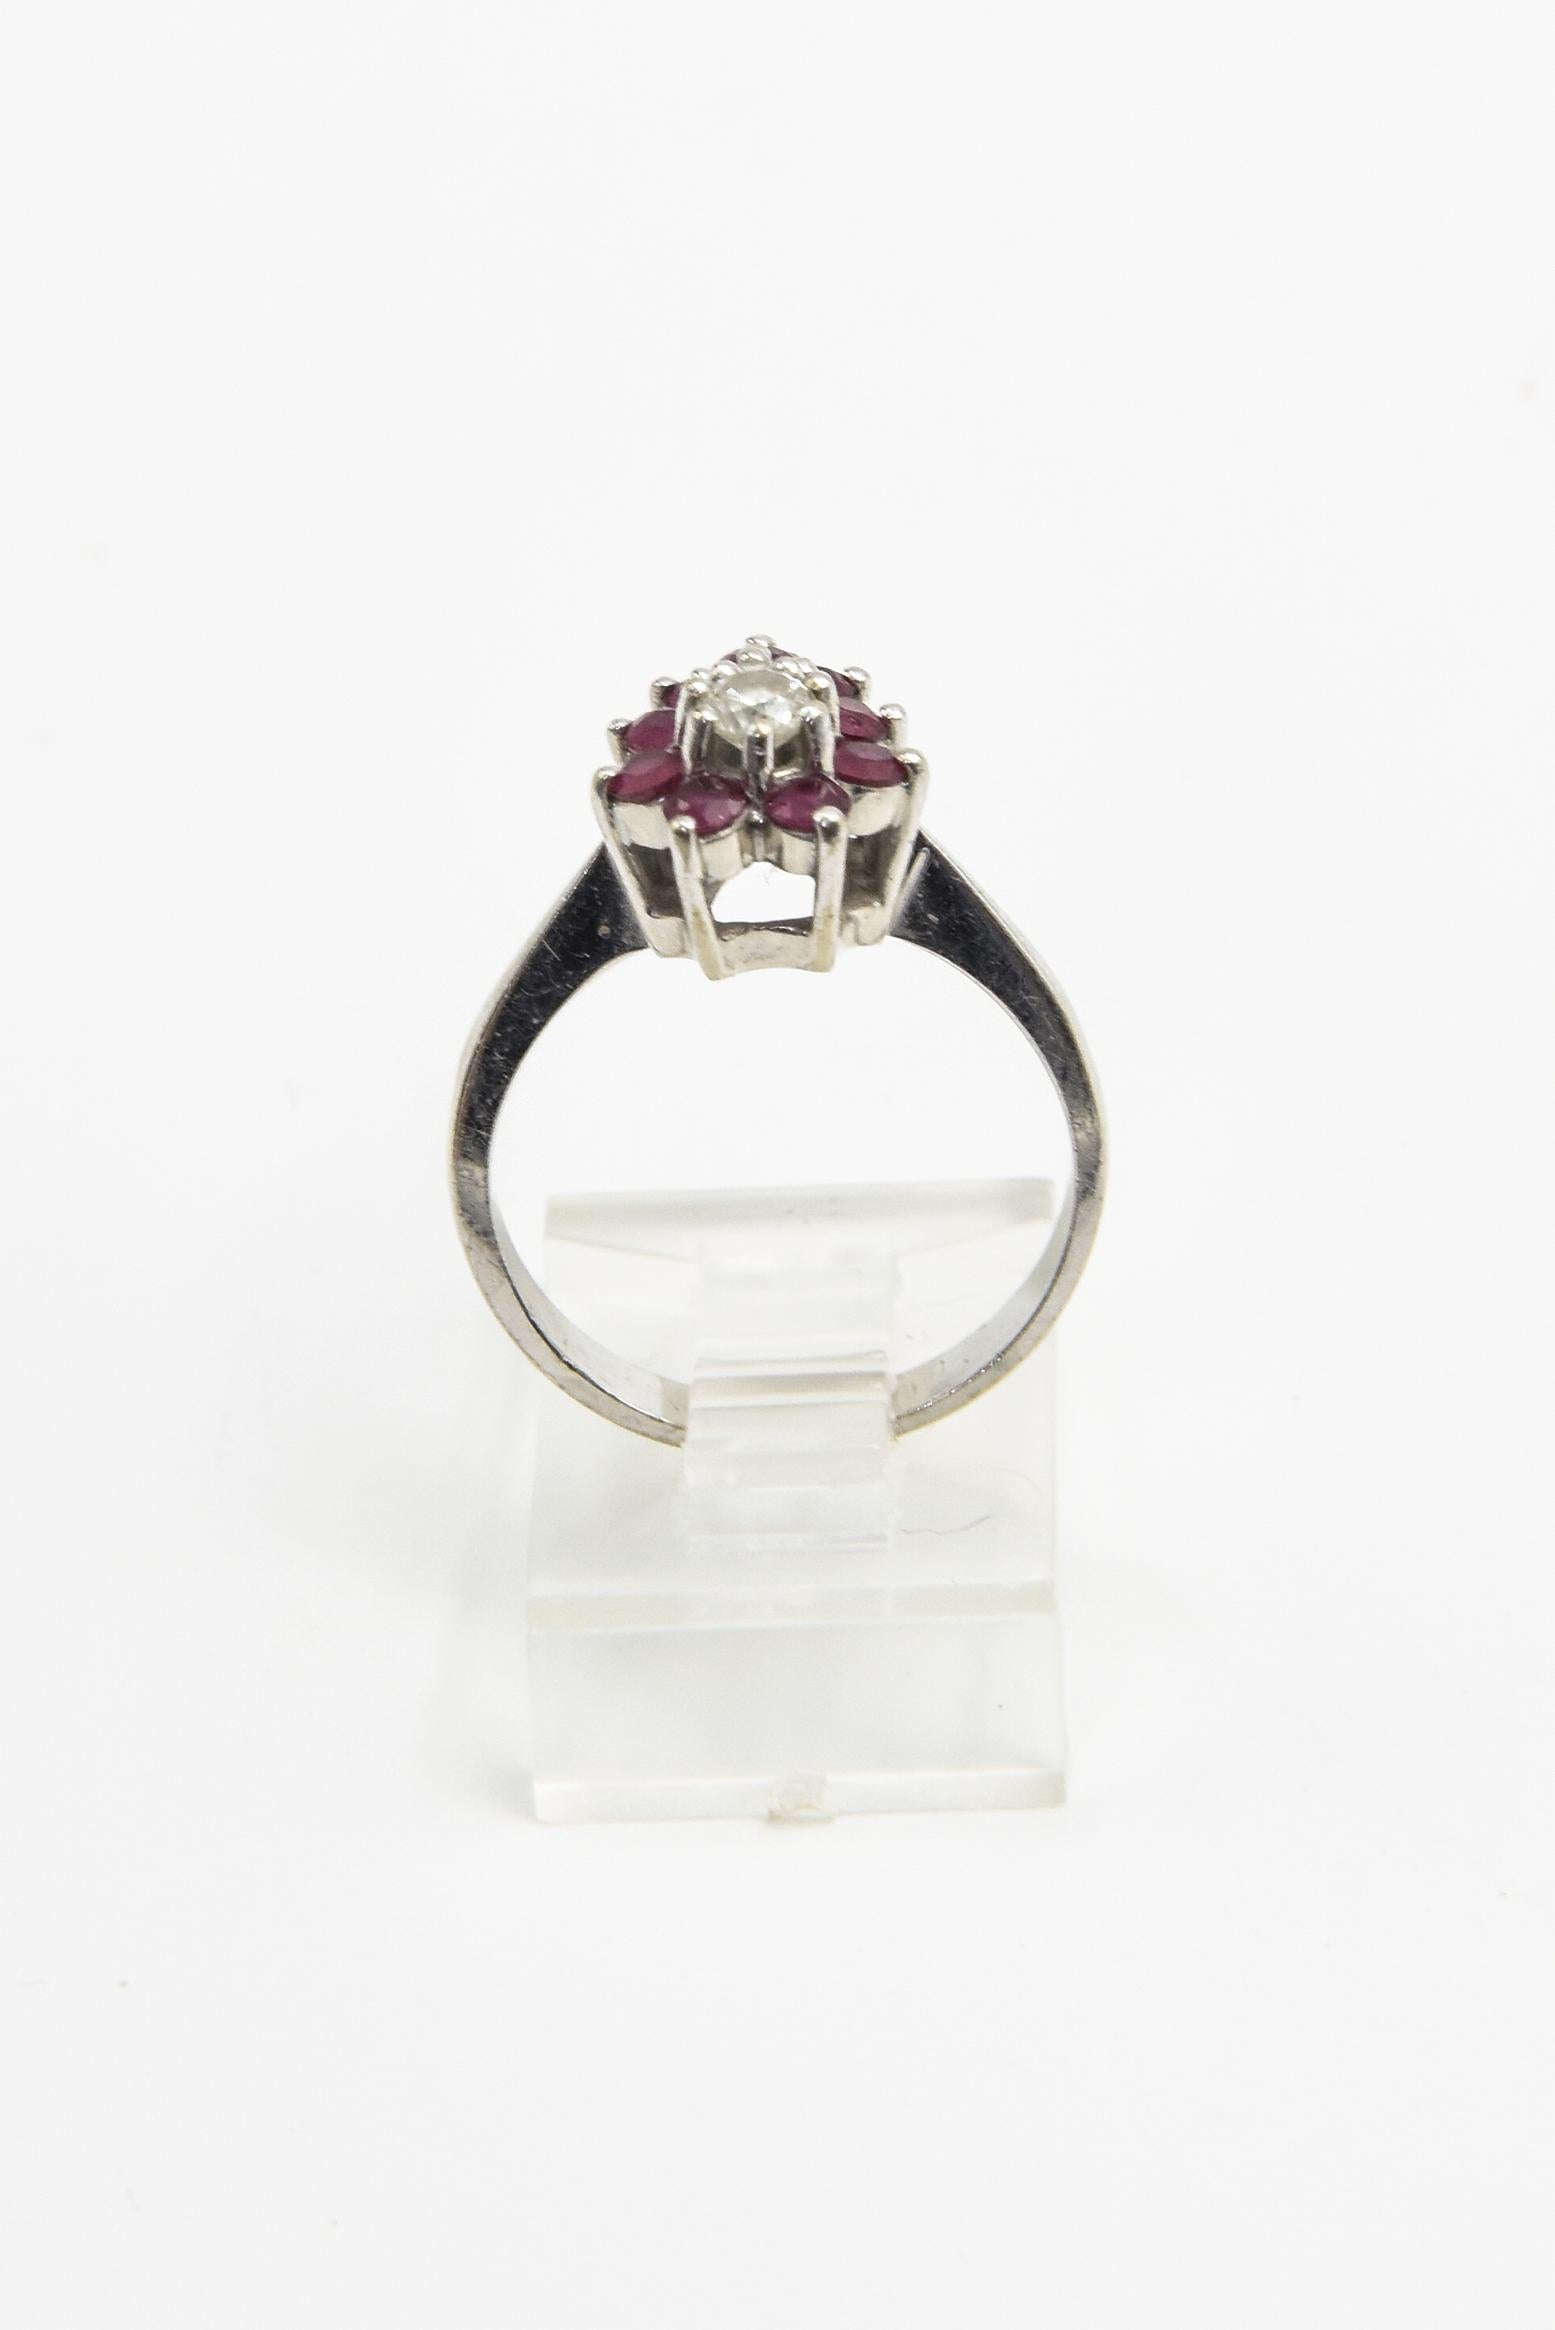 Diamond and Ruby Pear Shaped Cluster White Gold Ring In Good Condition For Sale In Miami Beach, FL